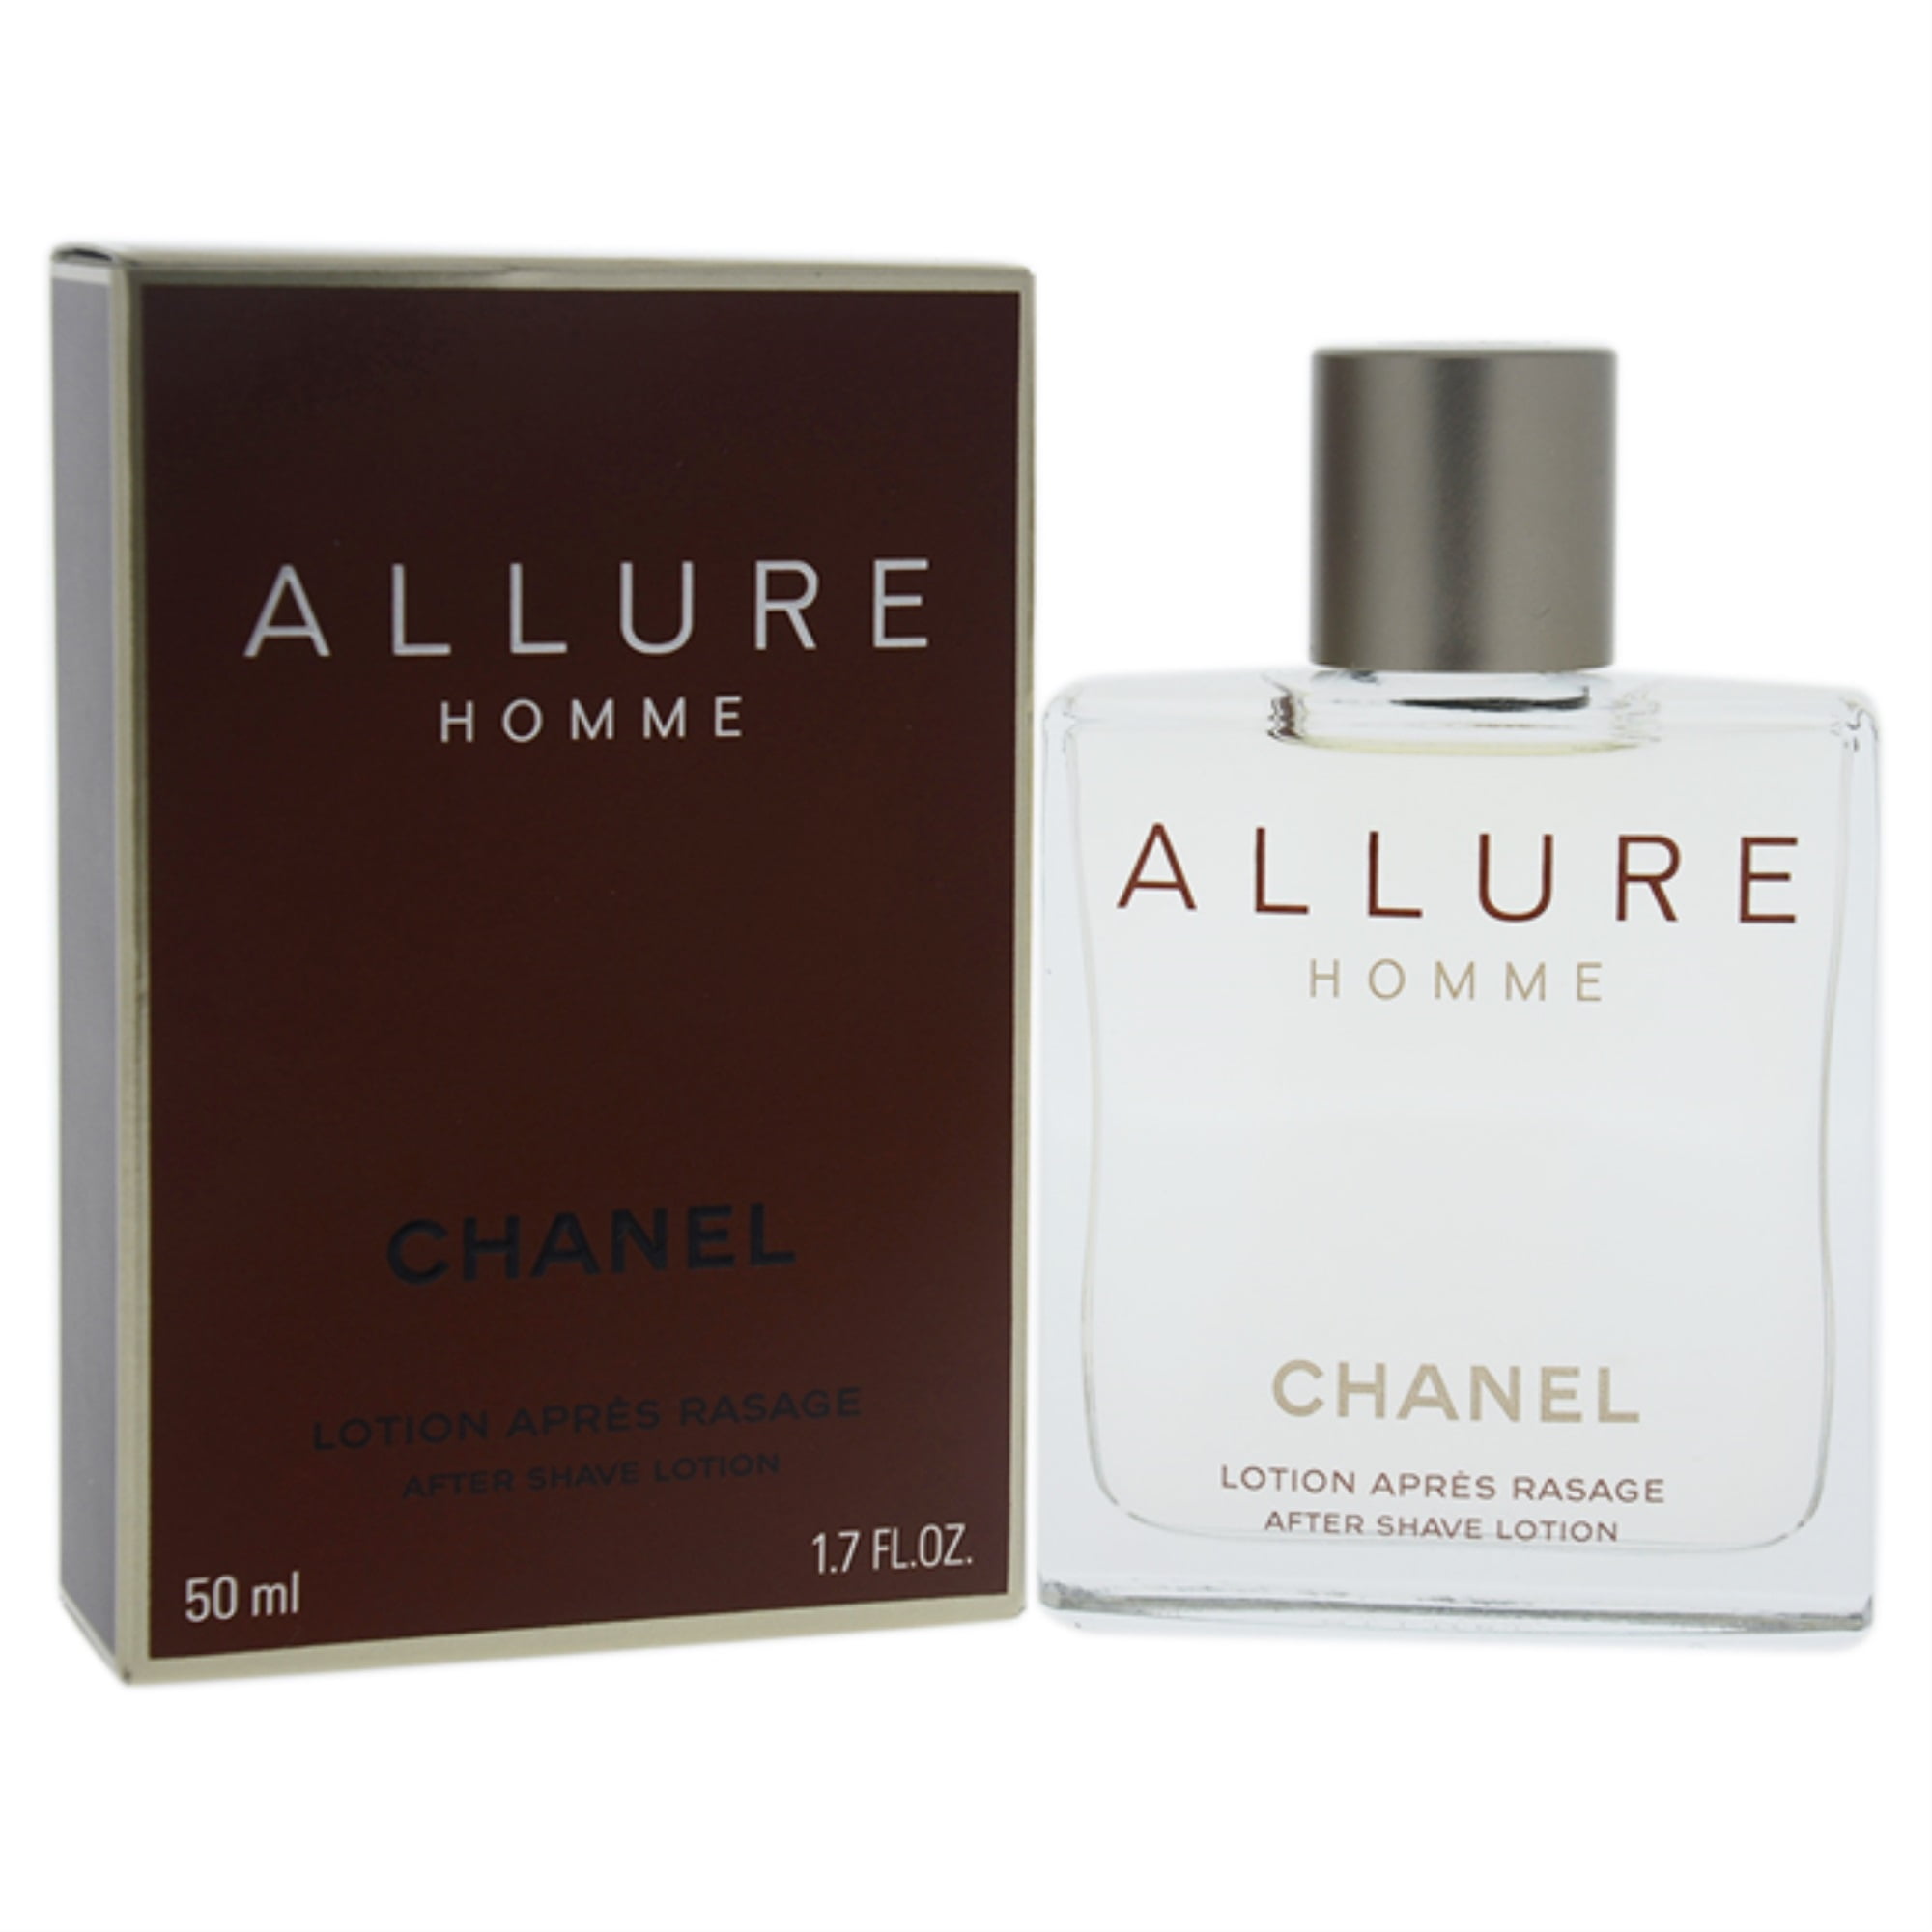 Allure Homme by Chanel for Men - 1.7 oz After Shave Lotion